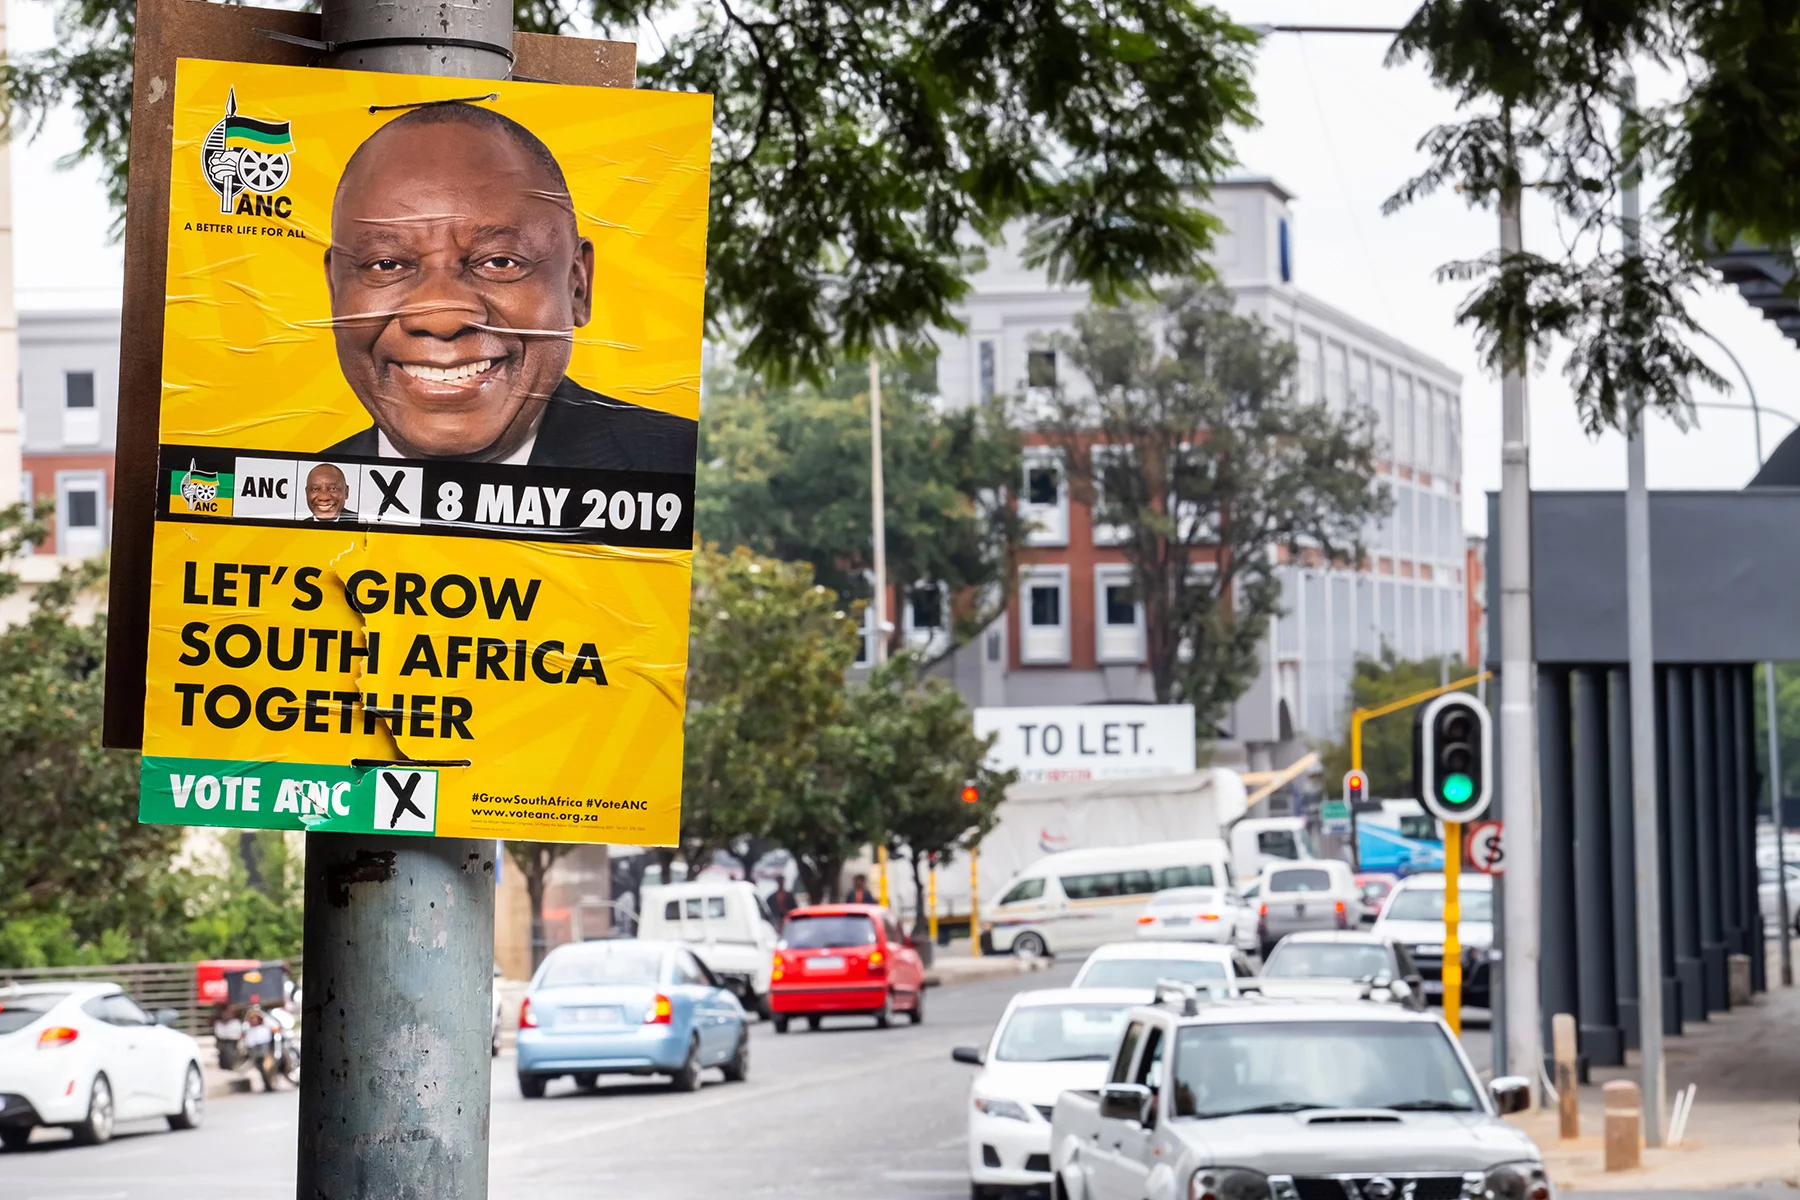 South African government: Cyril Ramaphosa, the president